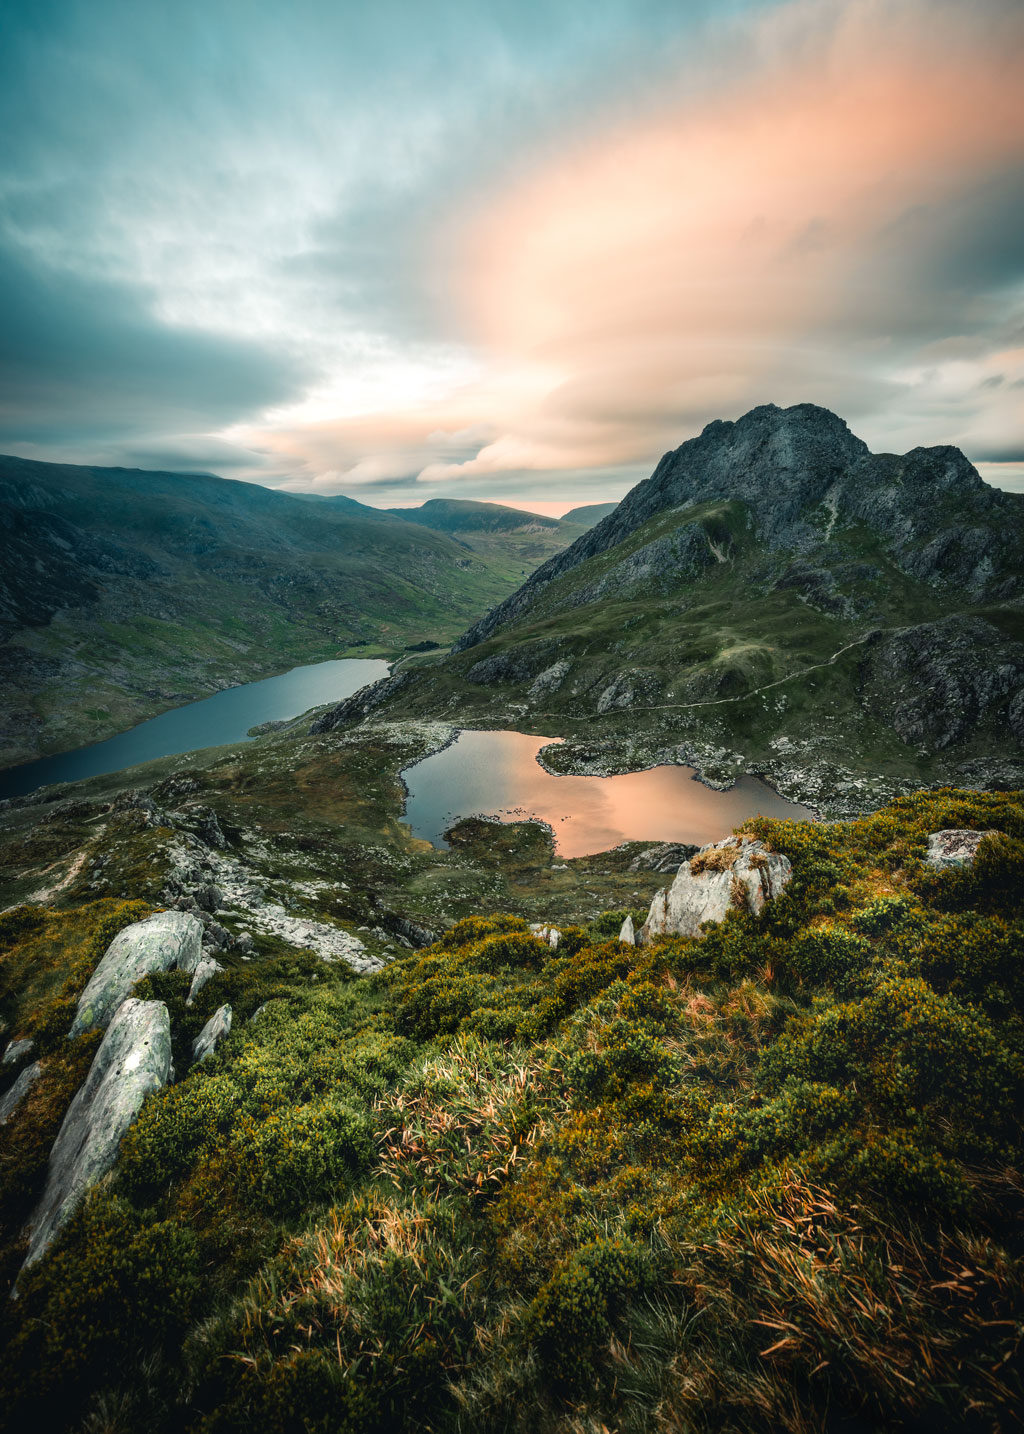 Top tips on how to take great vertical landscape photos